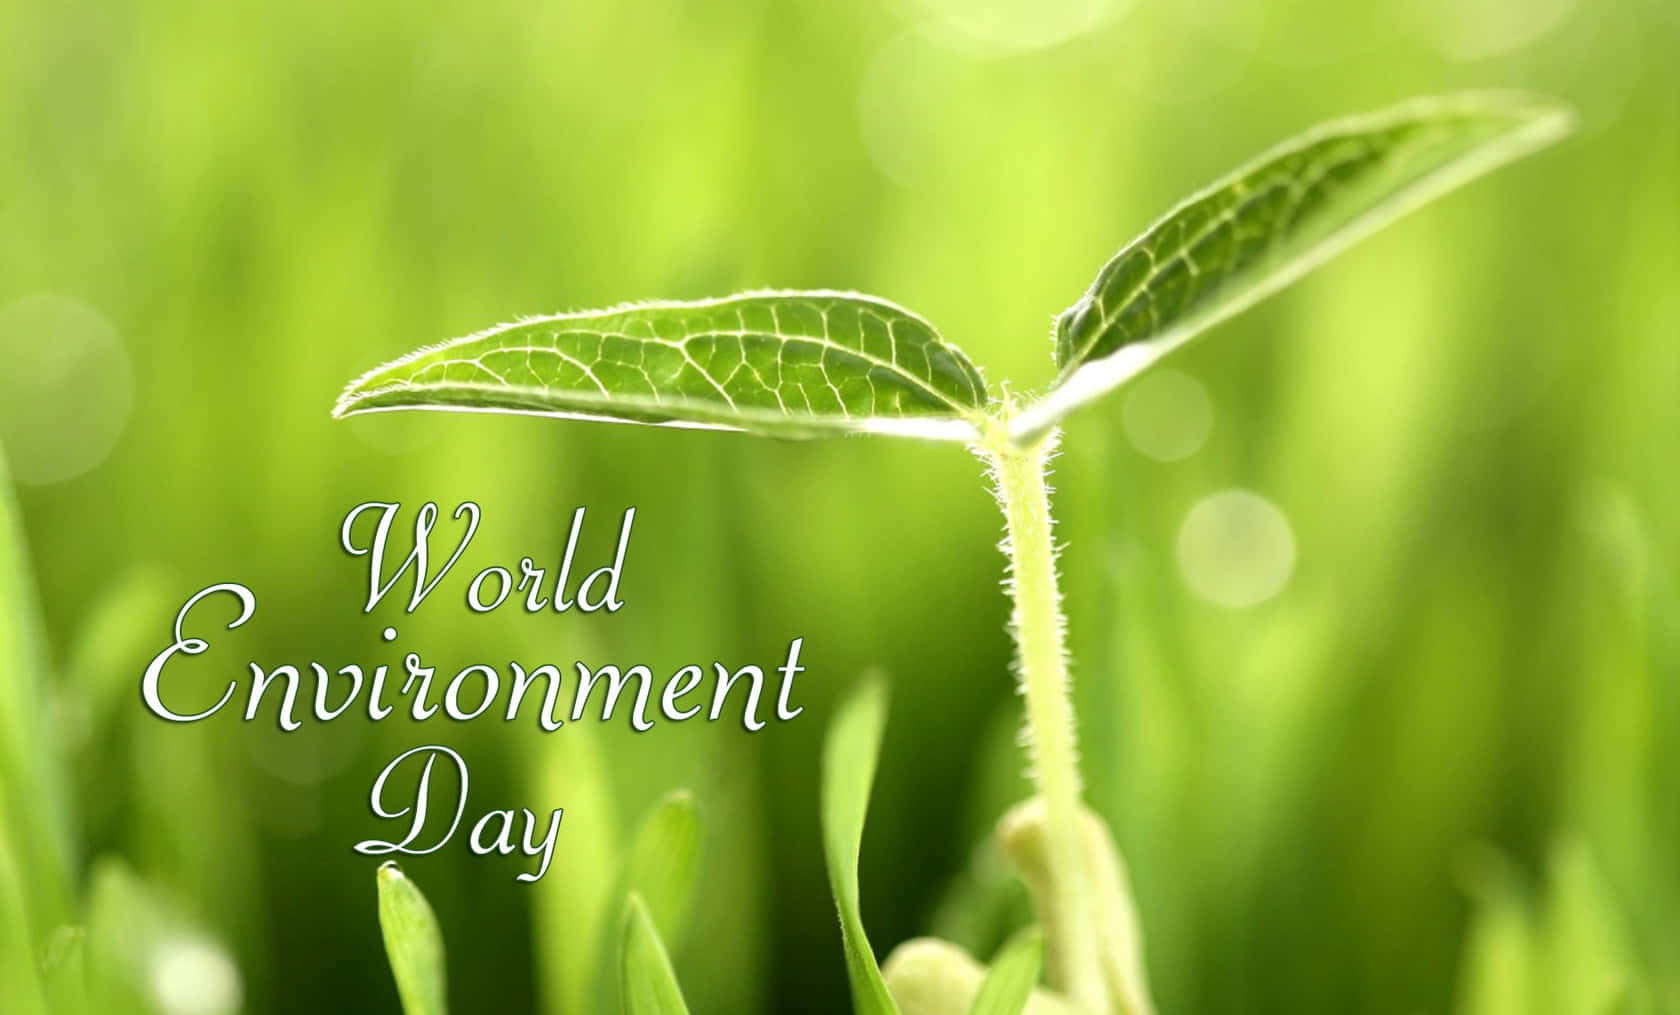 World Environment Day Sprouting Plant Leaves Wallpaper